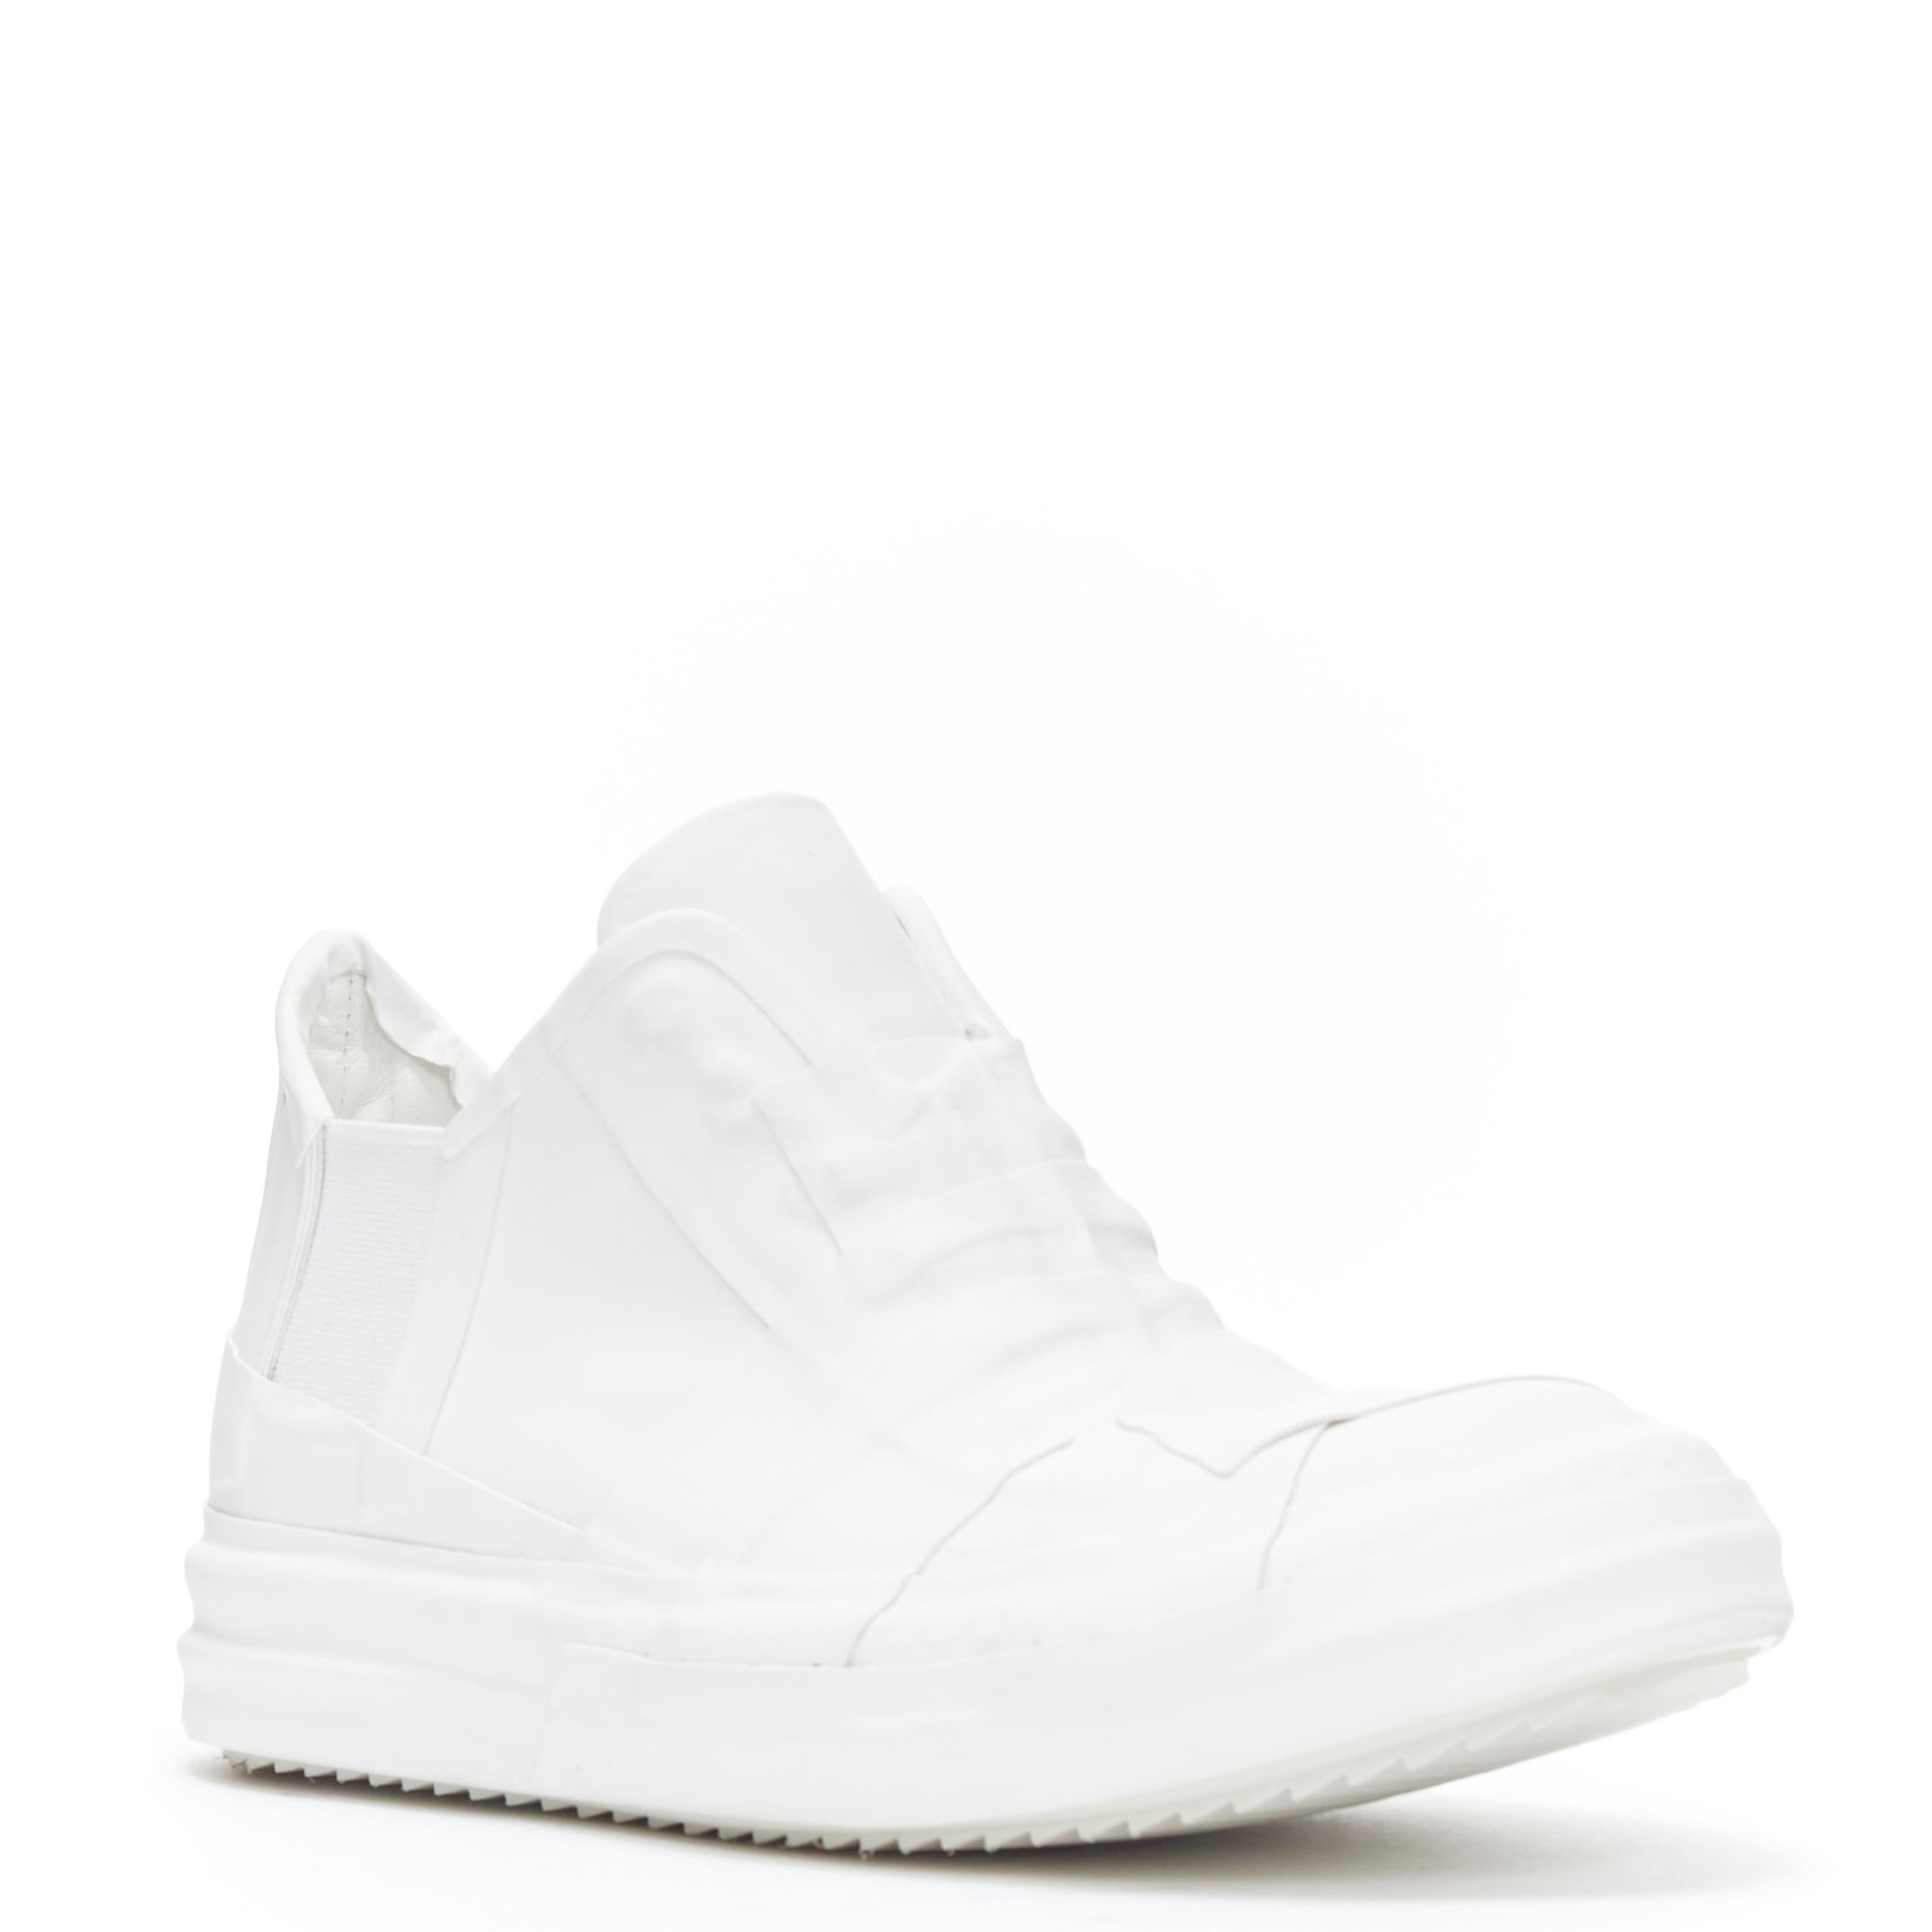 new RICK OWENS Geobasket Mummy Plaster wrapped white mid top sneaker EU36 
Reference: TGAS/B01334 
Brand: Rick Owens 
Designer: Rick Owens 
Model: White Plastered Geobasket 
Material: Rubber 
Color: White
Pattern: Solid 
Closure: Stretch 
Extra